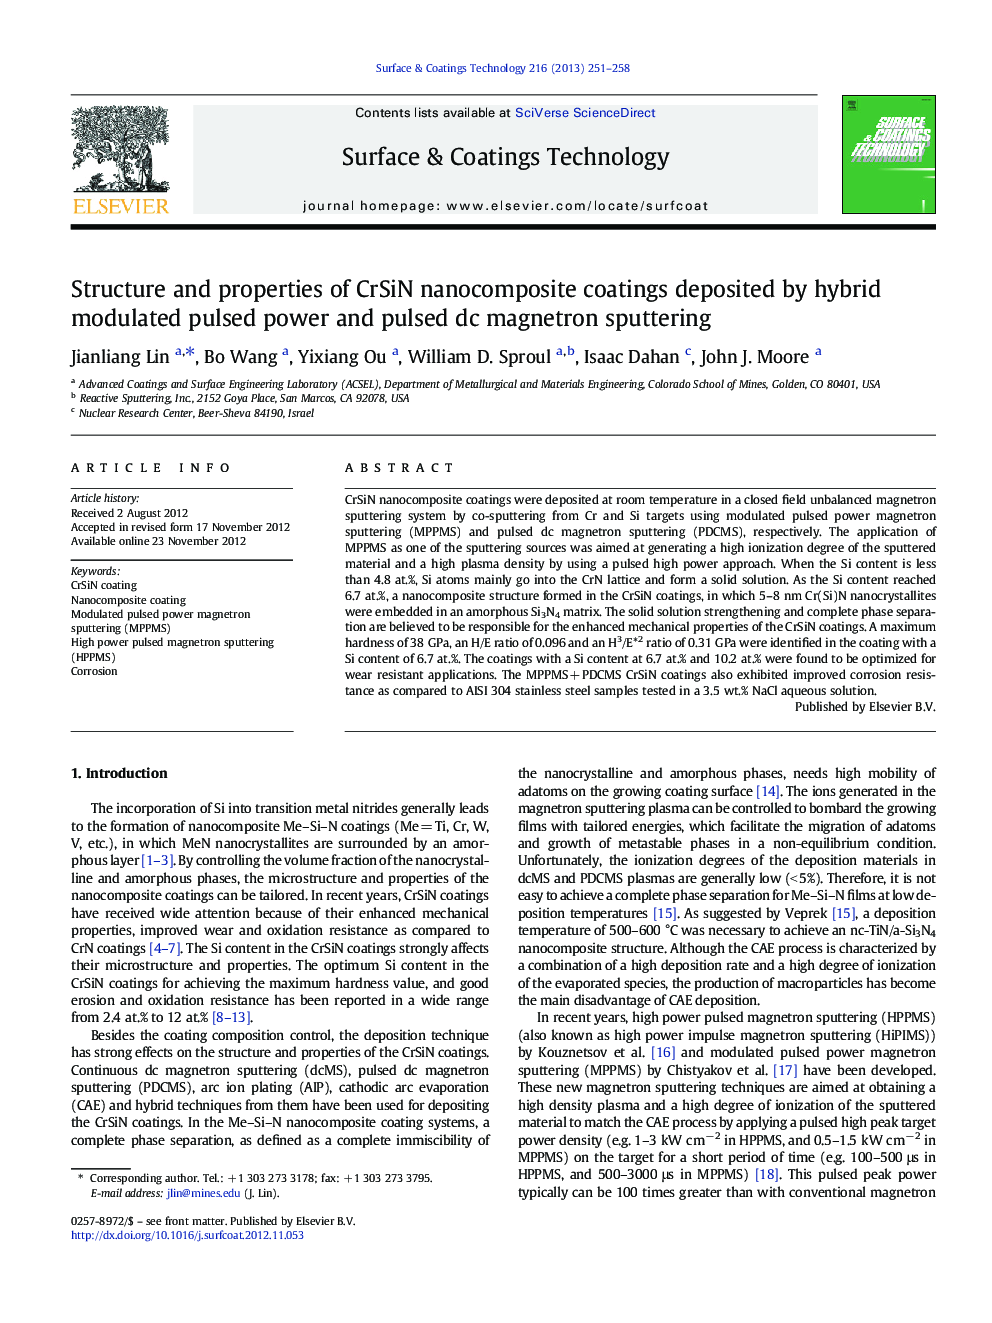 Structure and properties of CrSiN nanocomposite coatings deposited by hybrid modulated pulsed power and pulsed dc magnetron sputtering